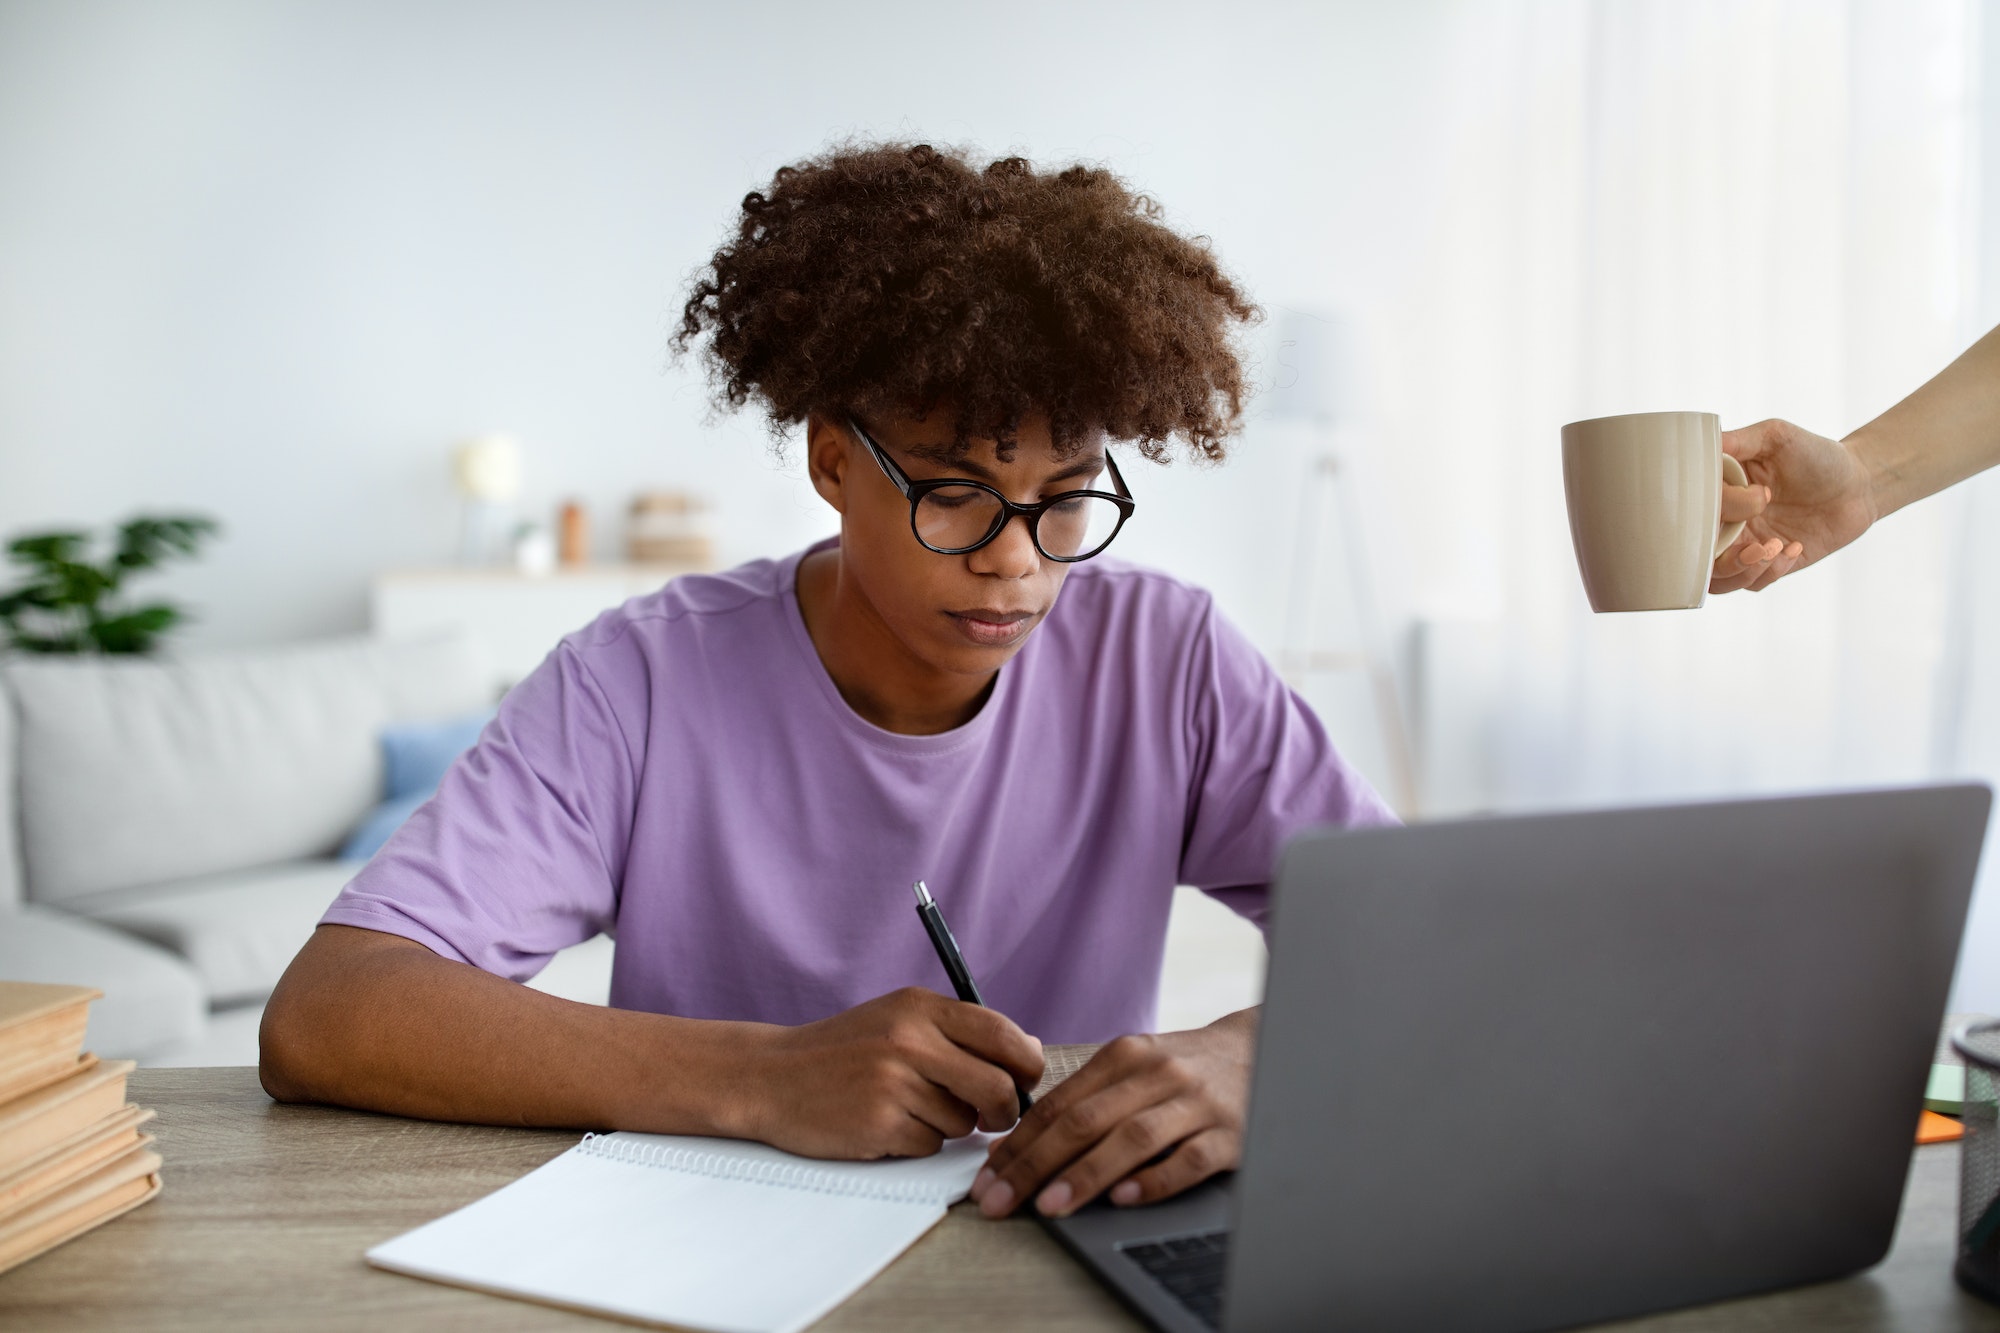 Serious black teen guy writing in notebook during webinar or lesson on laptop at home